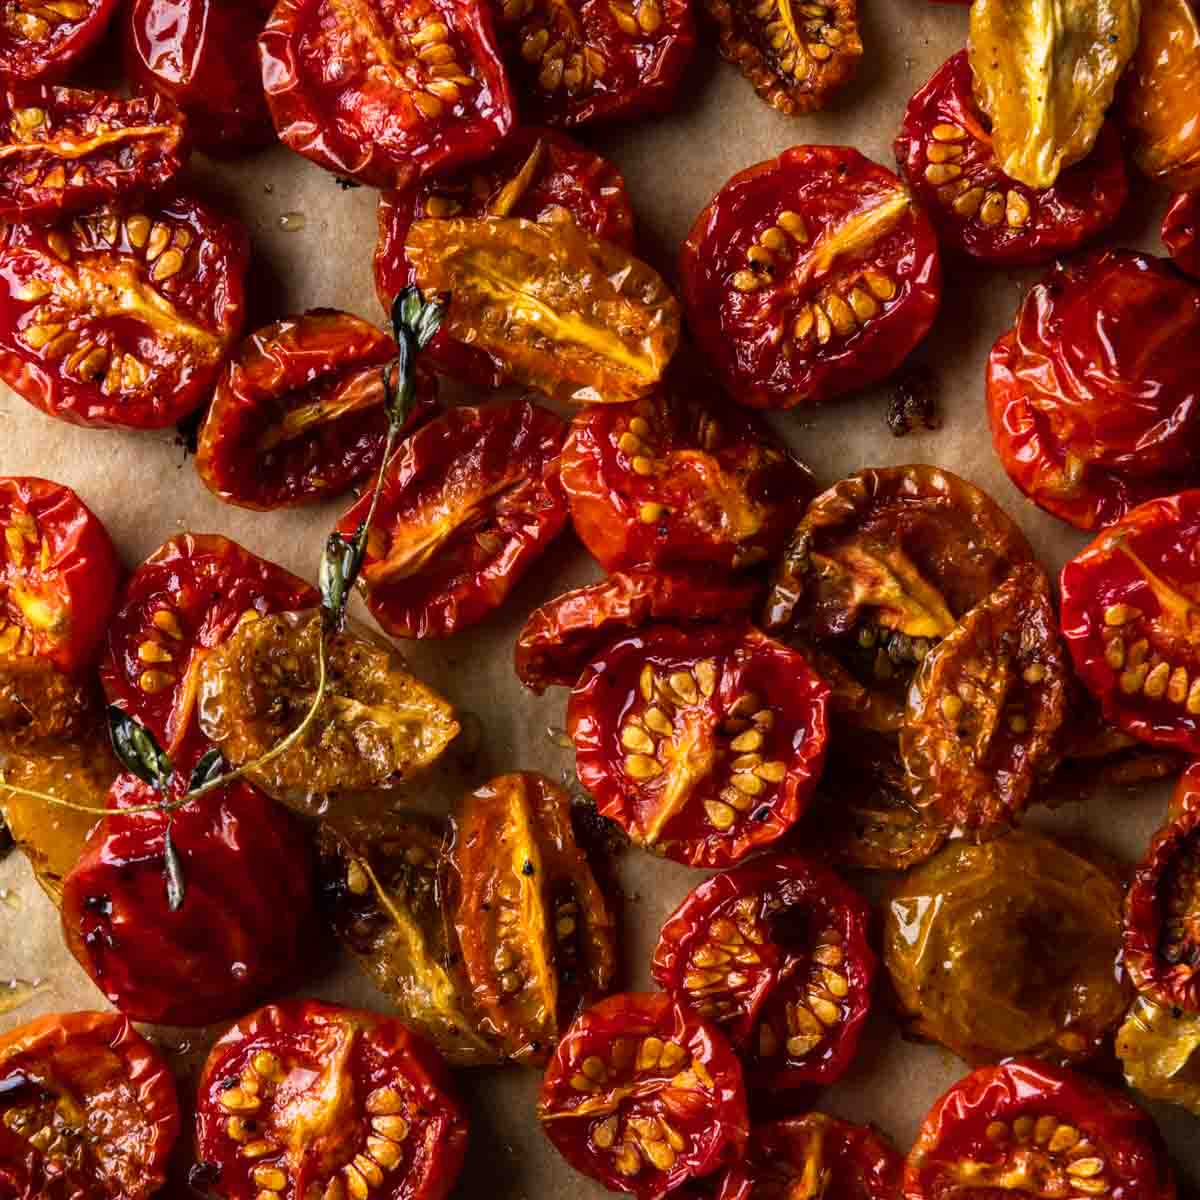 A close up image of oven roasted cherry tomatoes on a sheet pan